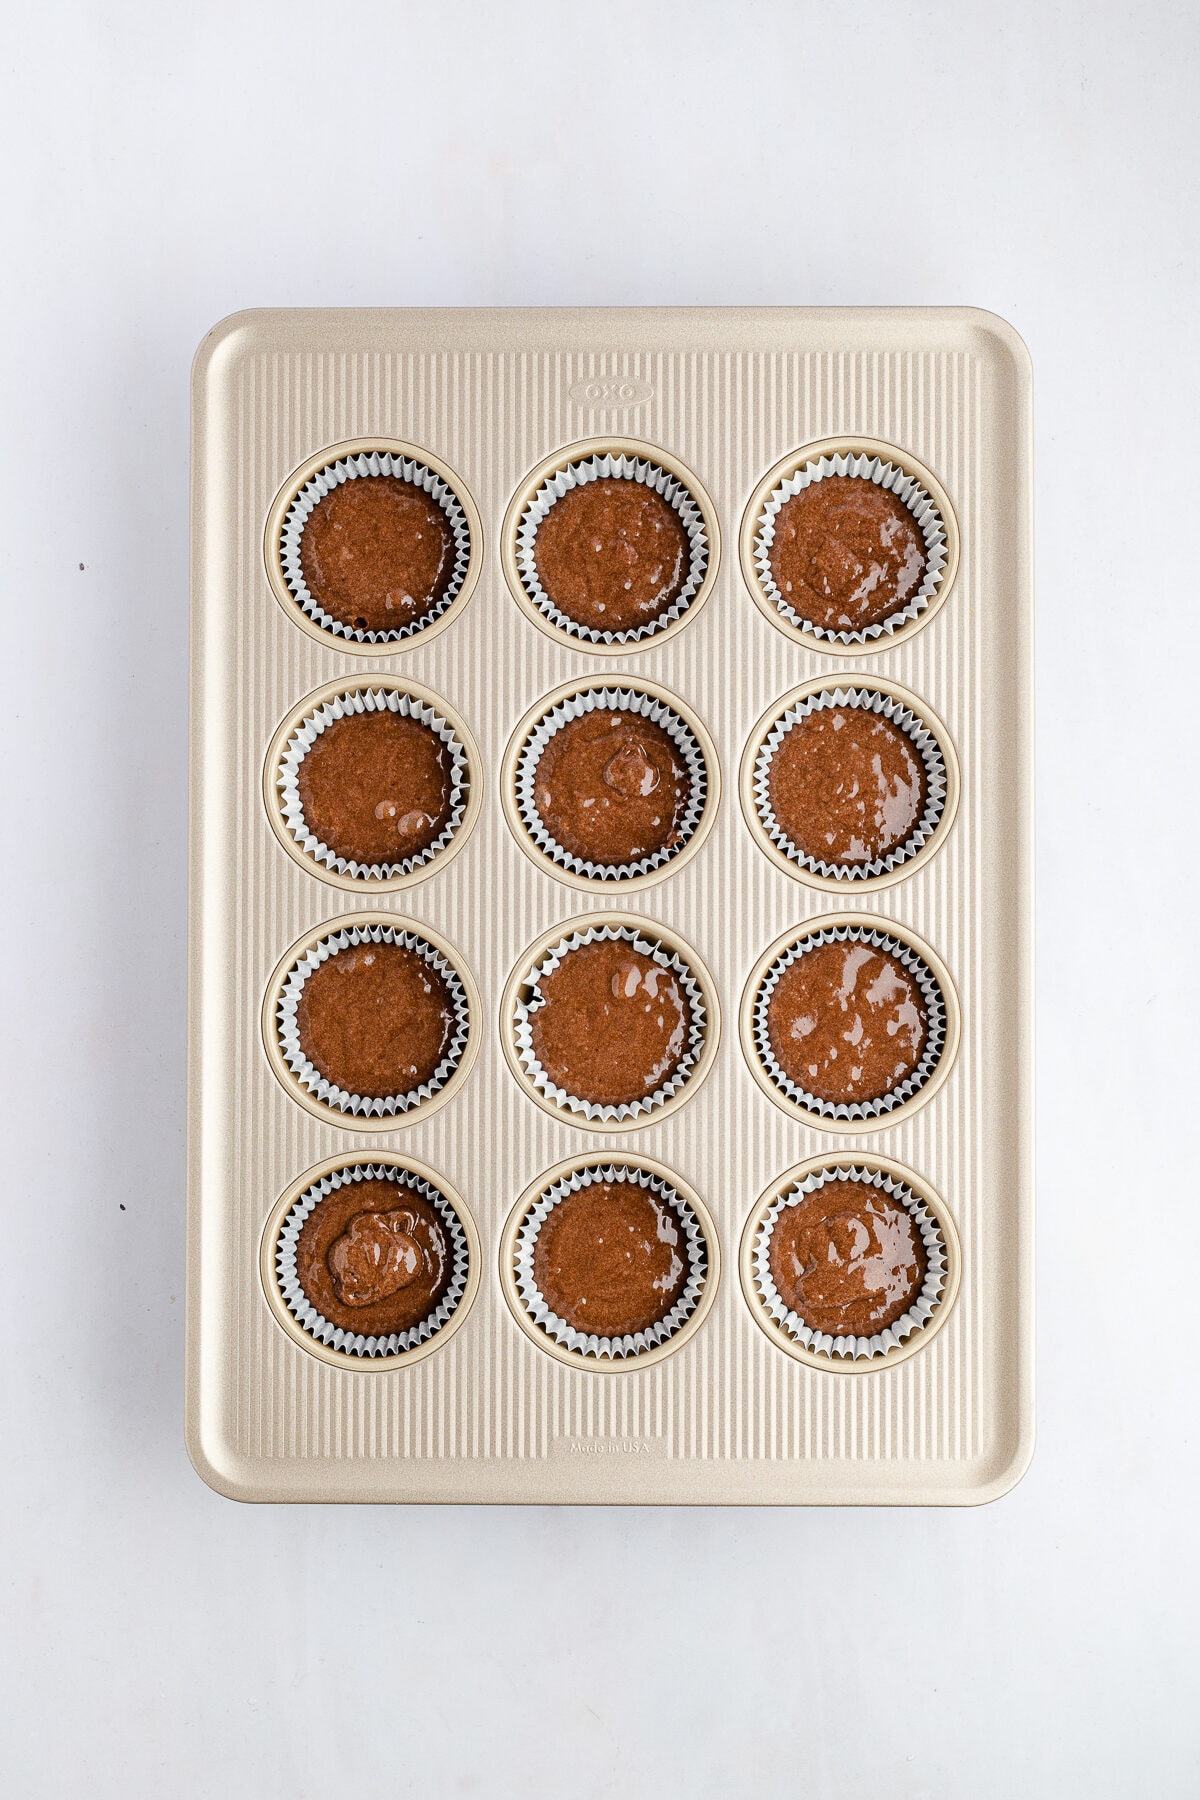 unbaked cupcake batter in a muffin tin.